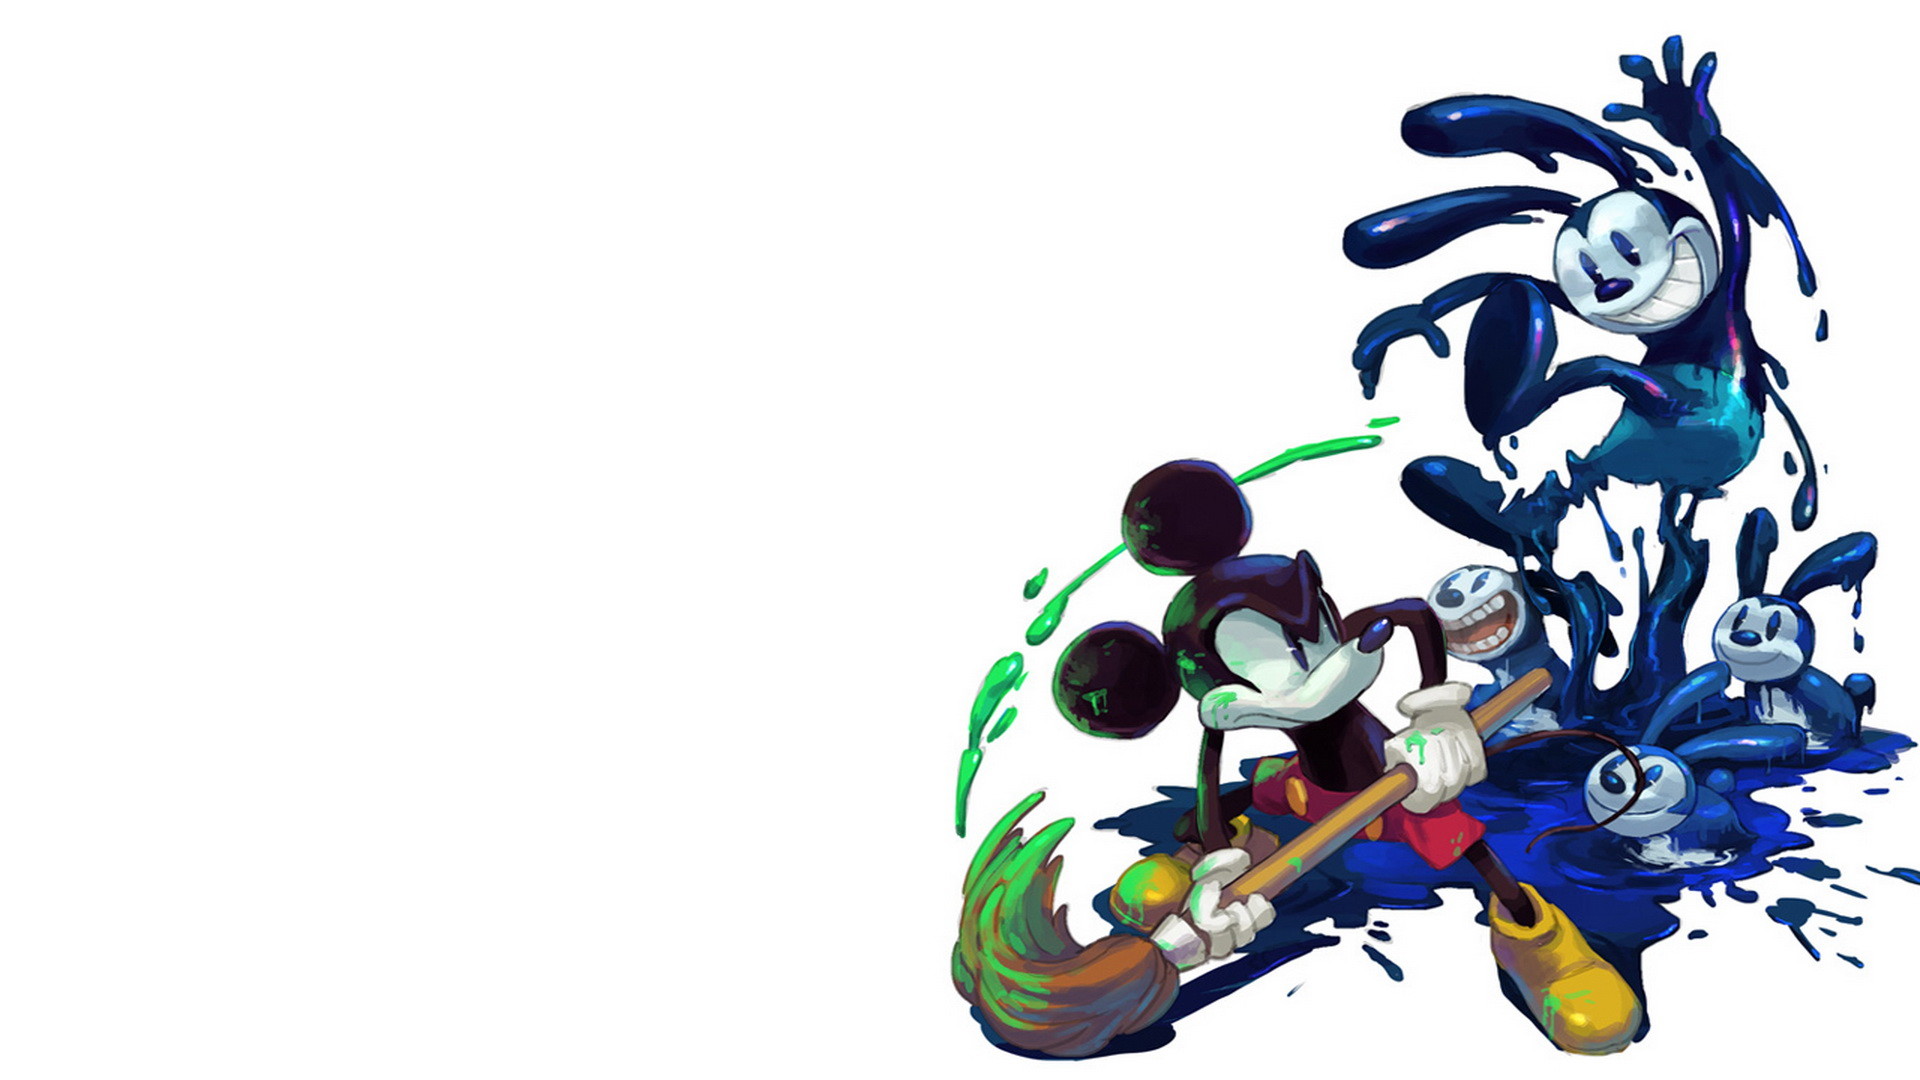 1920x1080 Images Of Mickey Mouse. Mickey Mouse Wallpapers